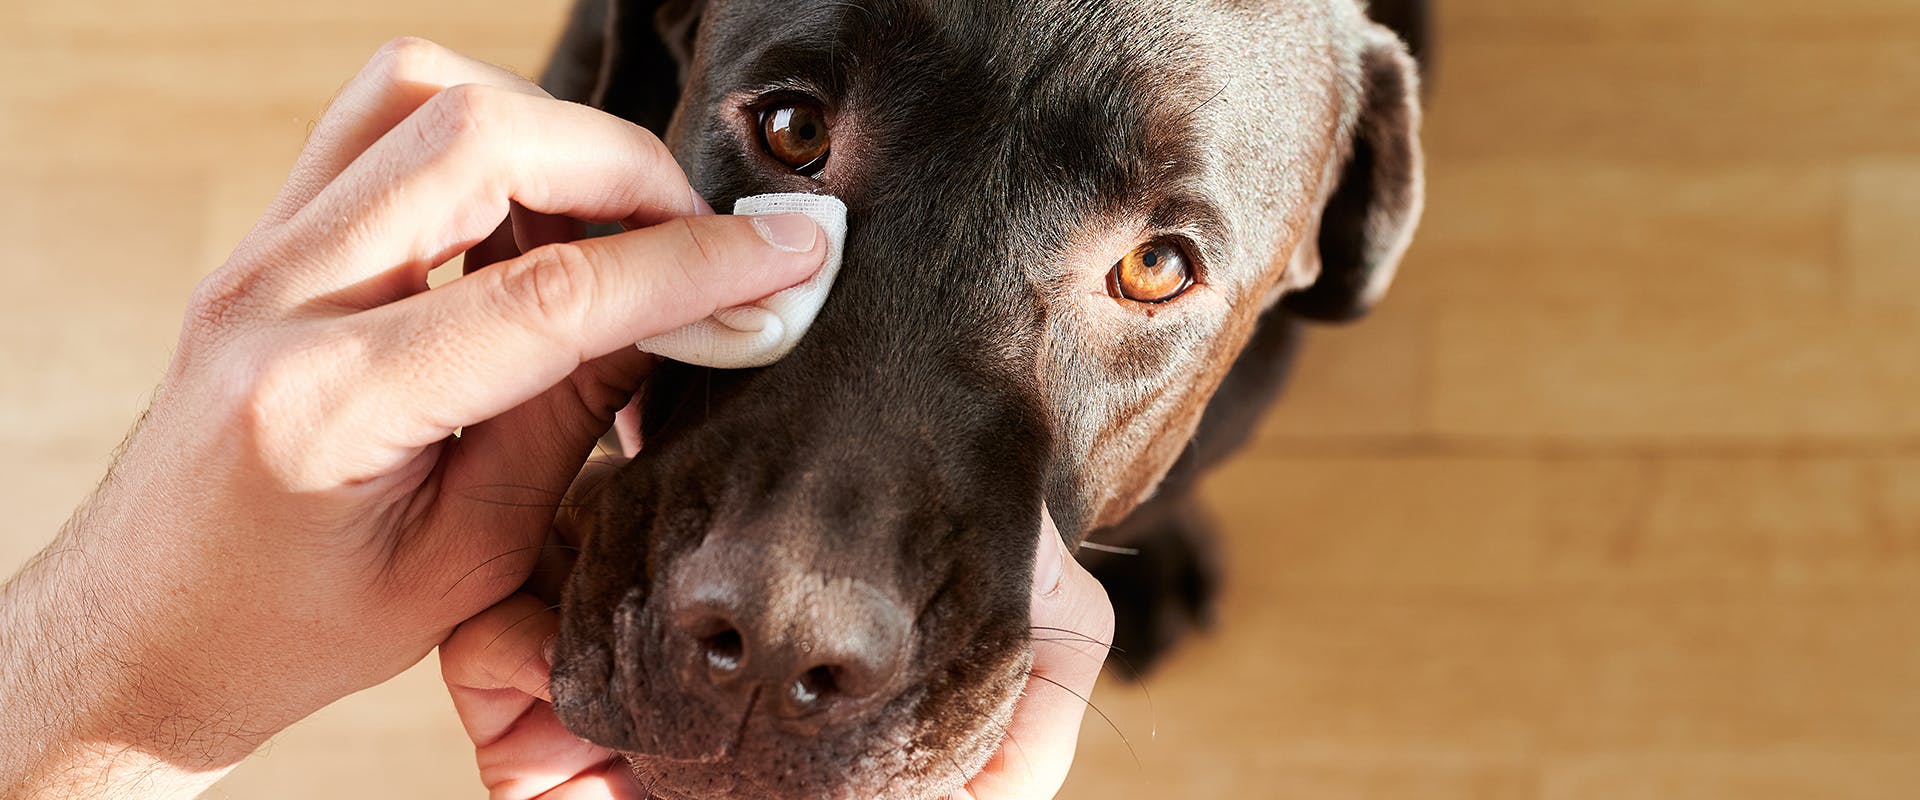 A hand cleaning a dog's eye with a cotton pad